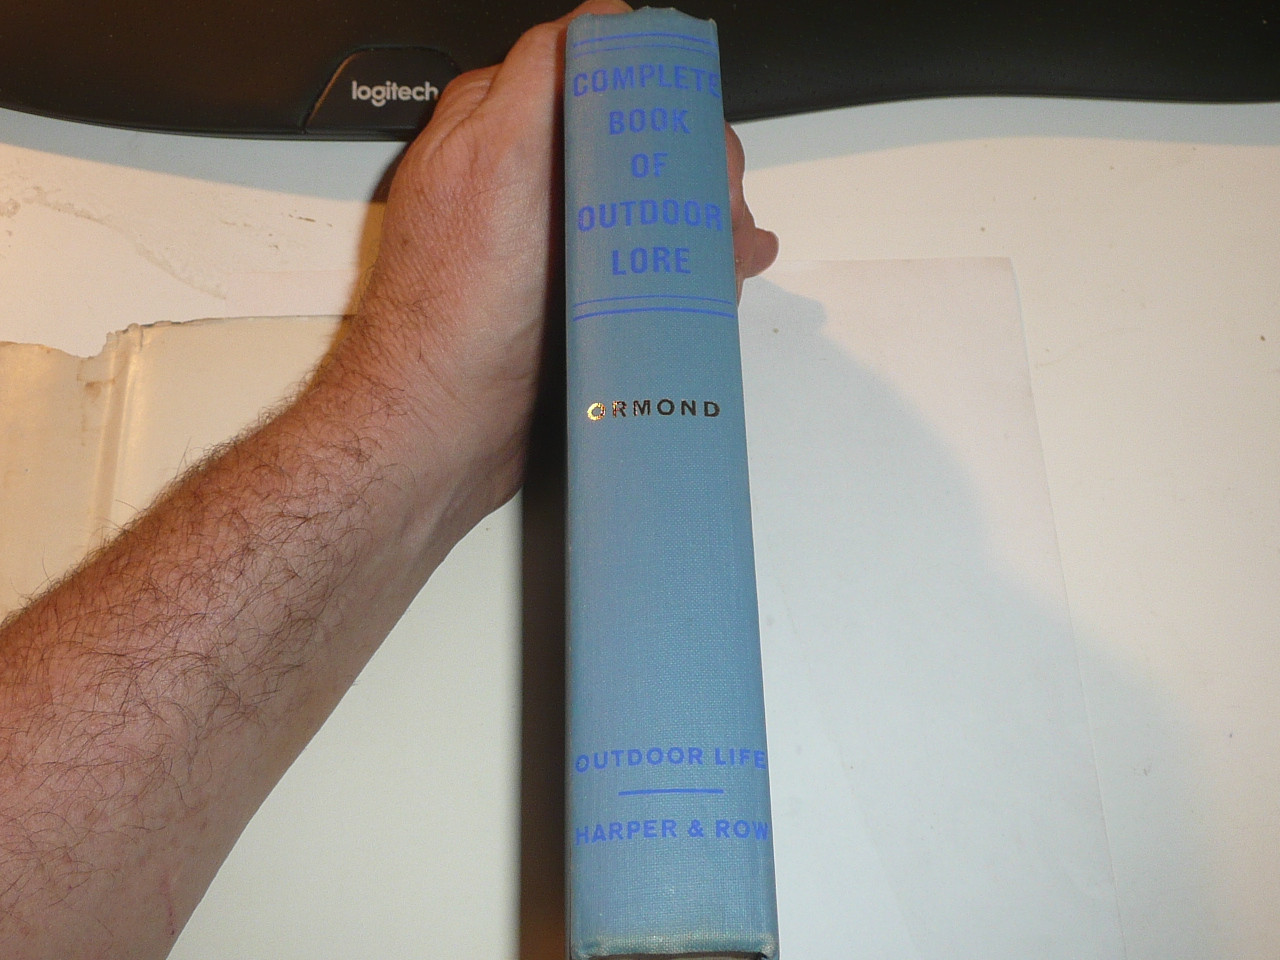 The Complete Book of Outdoor Lore, by Clyde Ormond, 3rd printing, 1965, hardbound with dust jacket